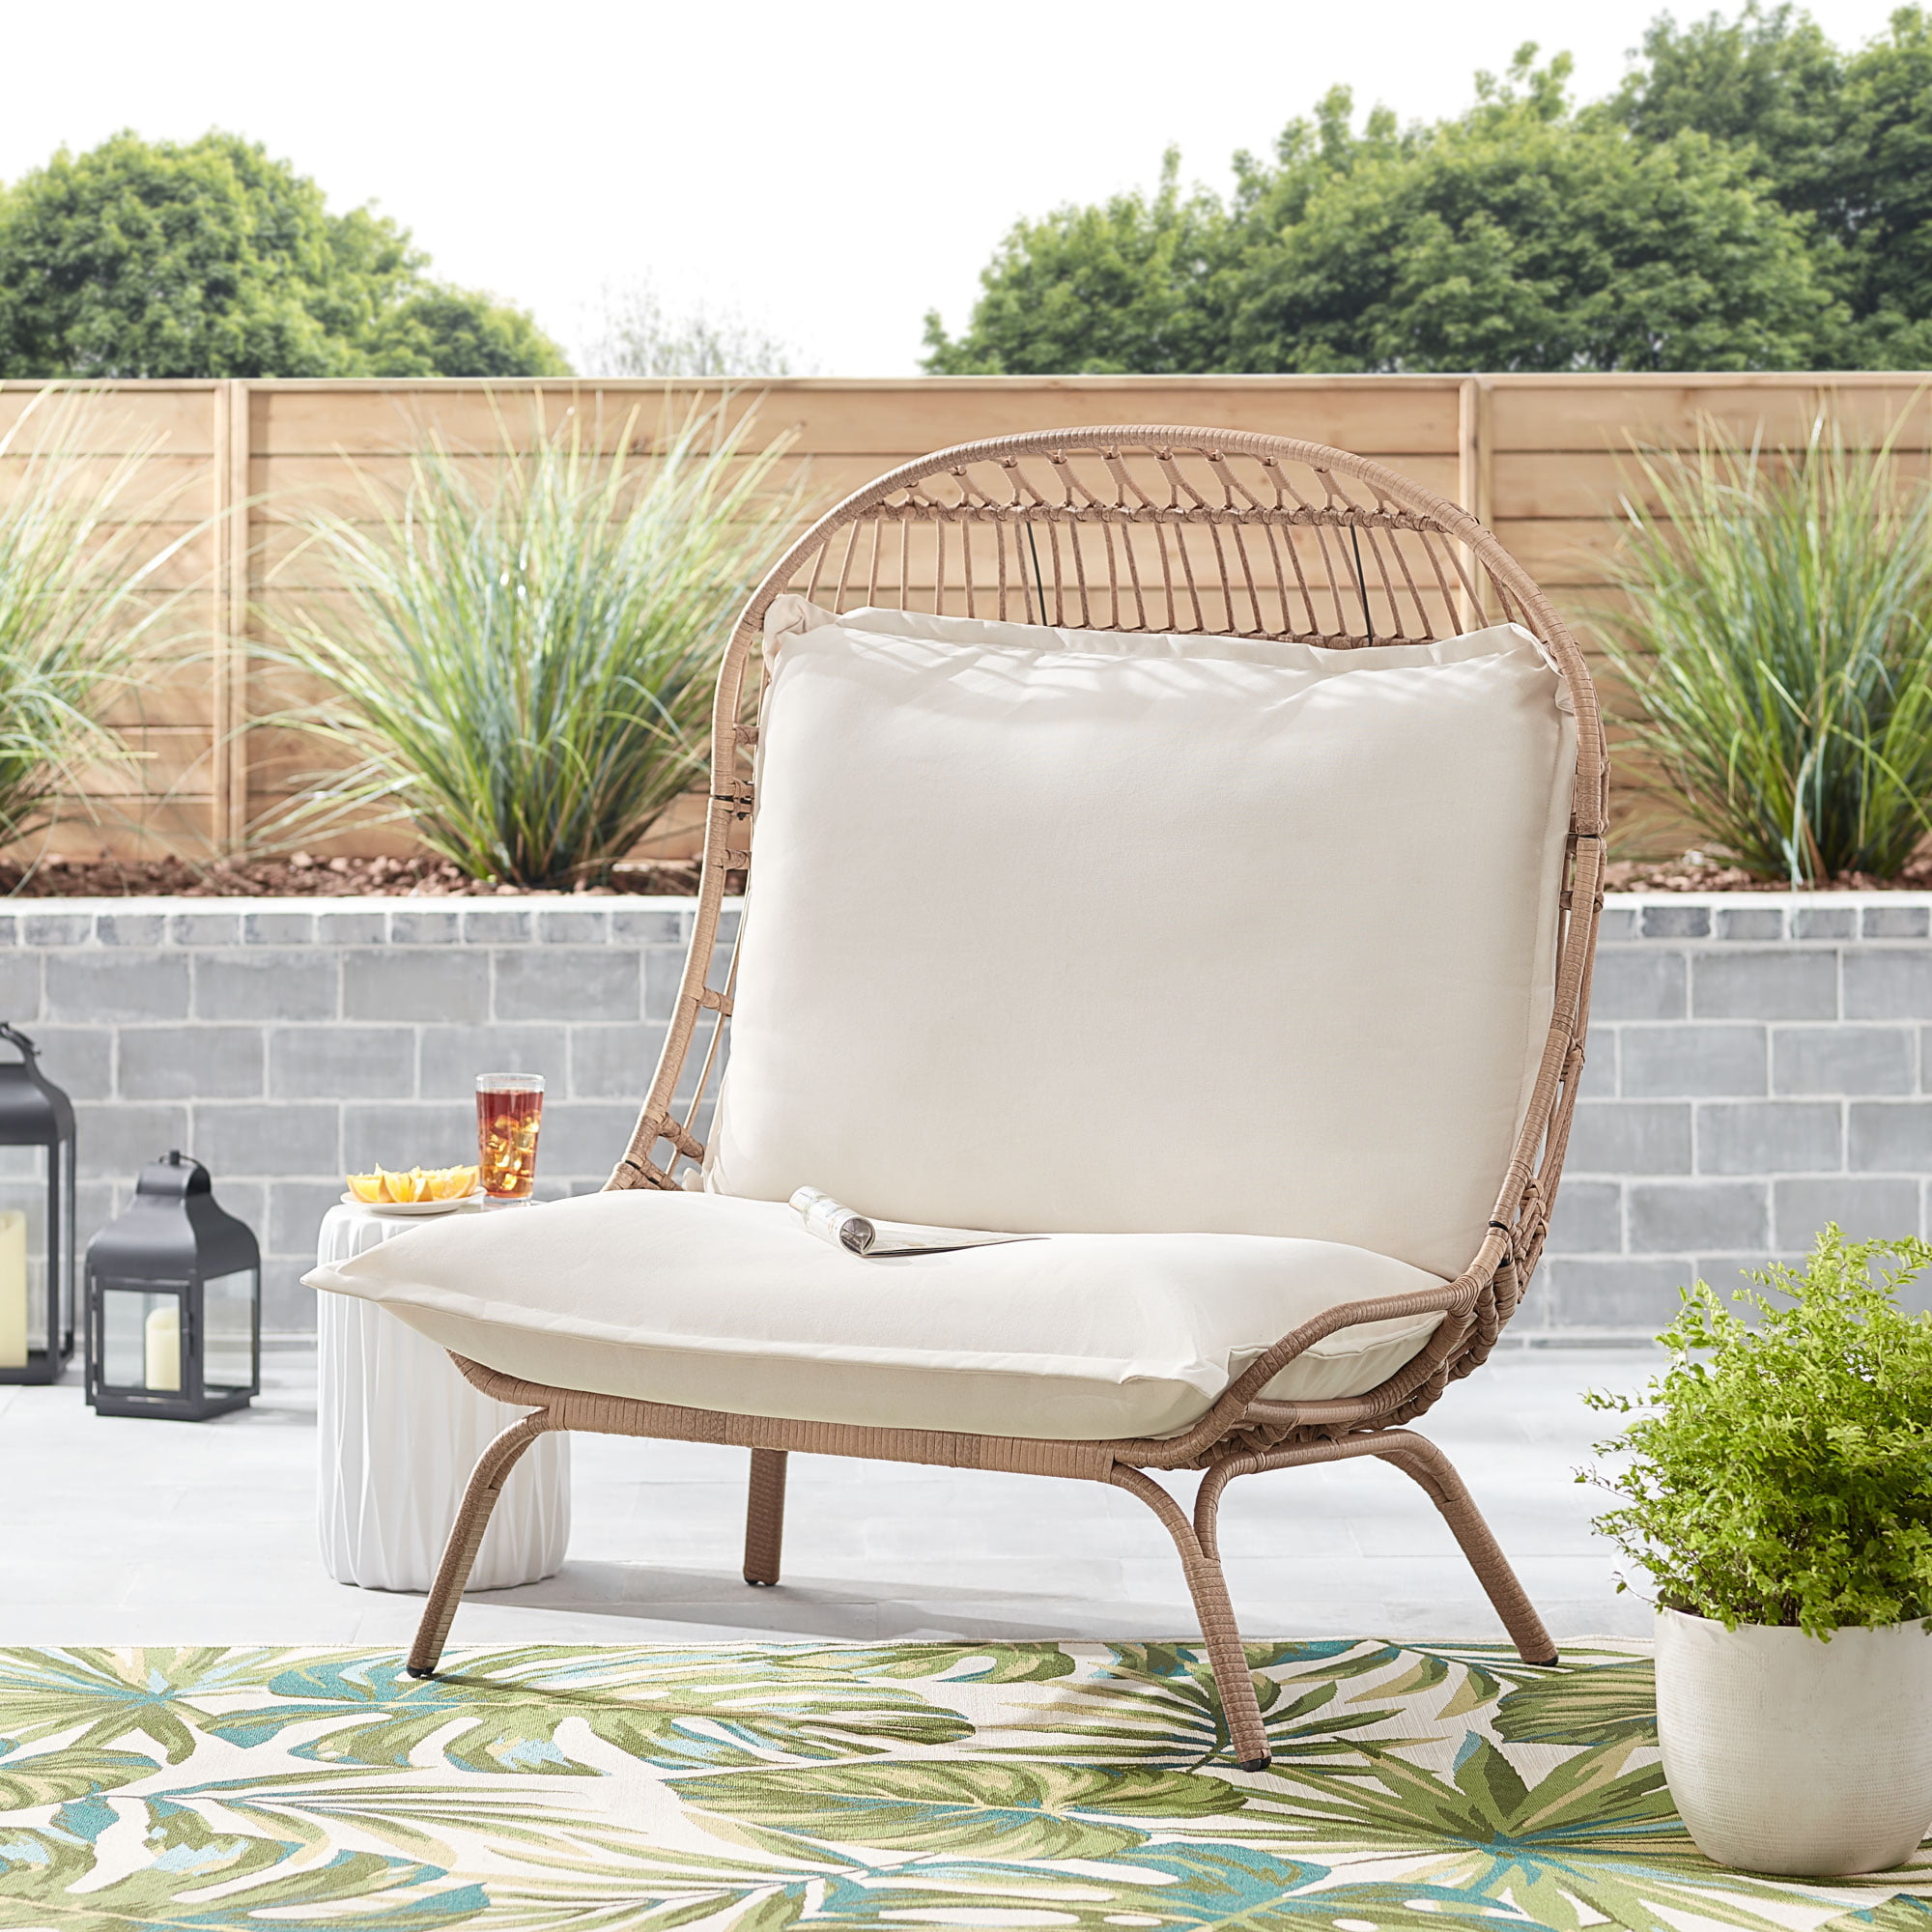 Better Homes & Gardens Willow Sage Steel Wicker Patio Cuddle Chair (Brown) $299 + Free Shipping